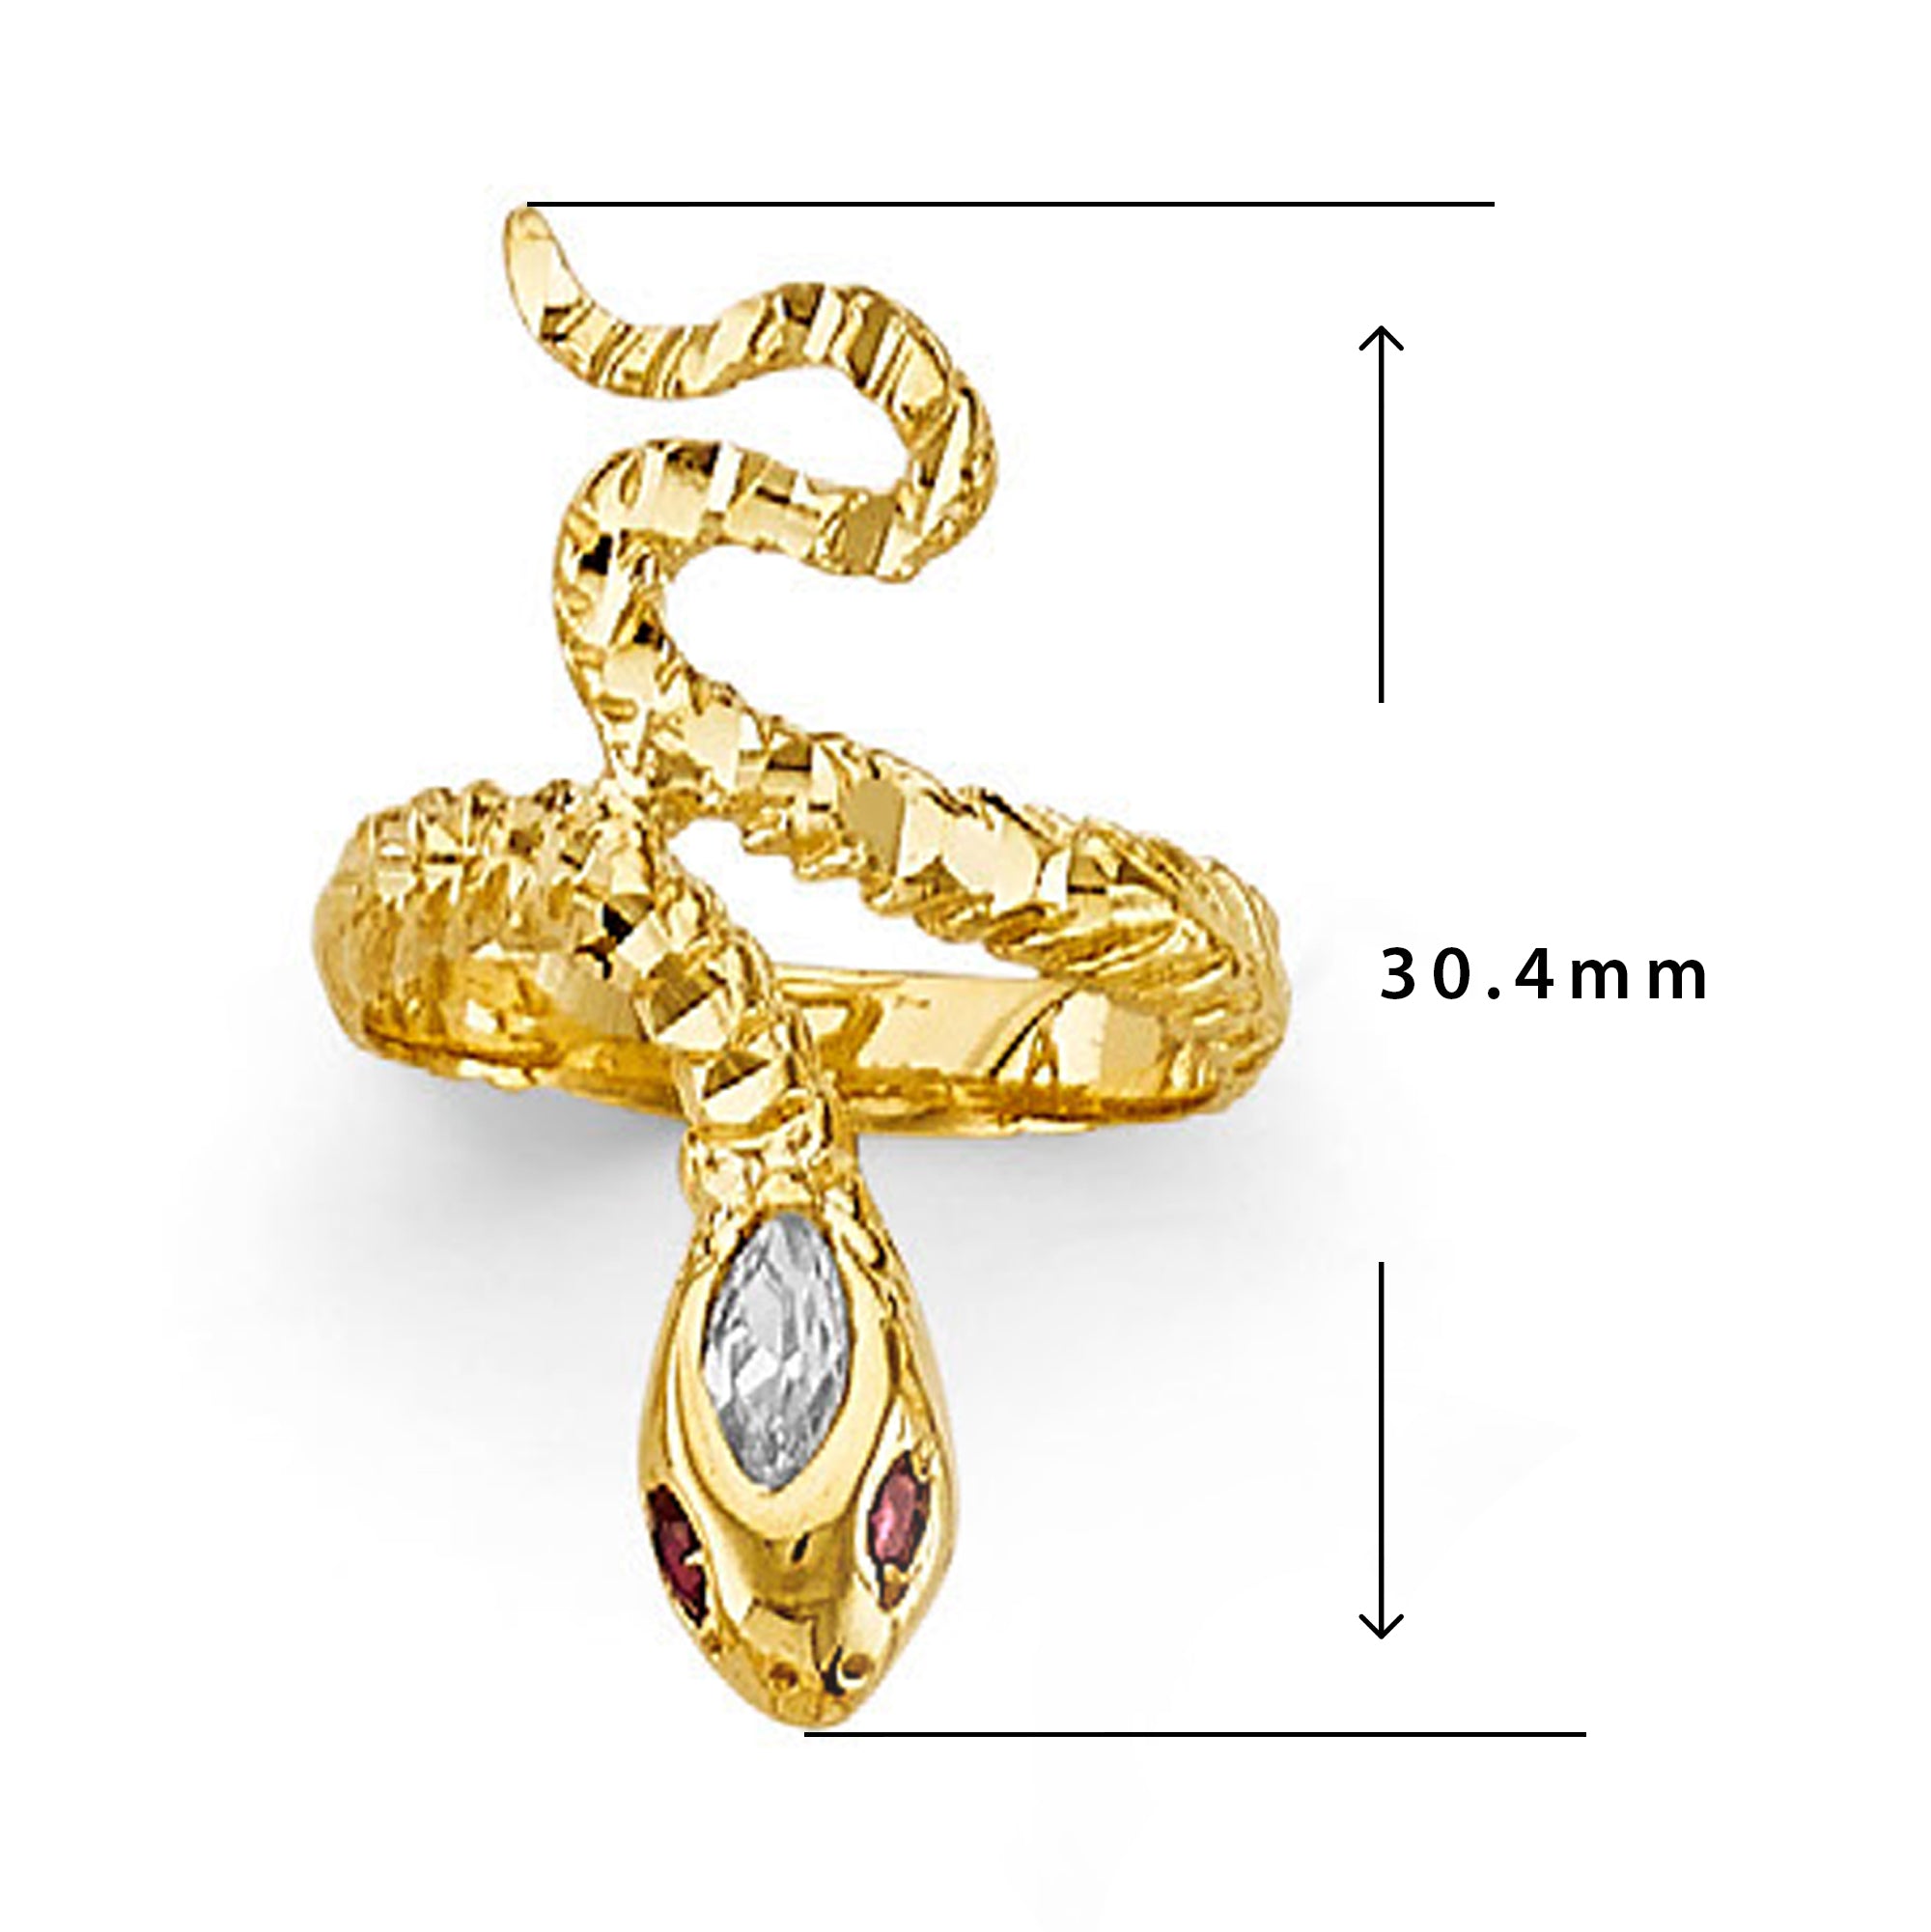 CZ Ruby-gaze Snake Ring in Solid Gold with Measurement